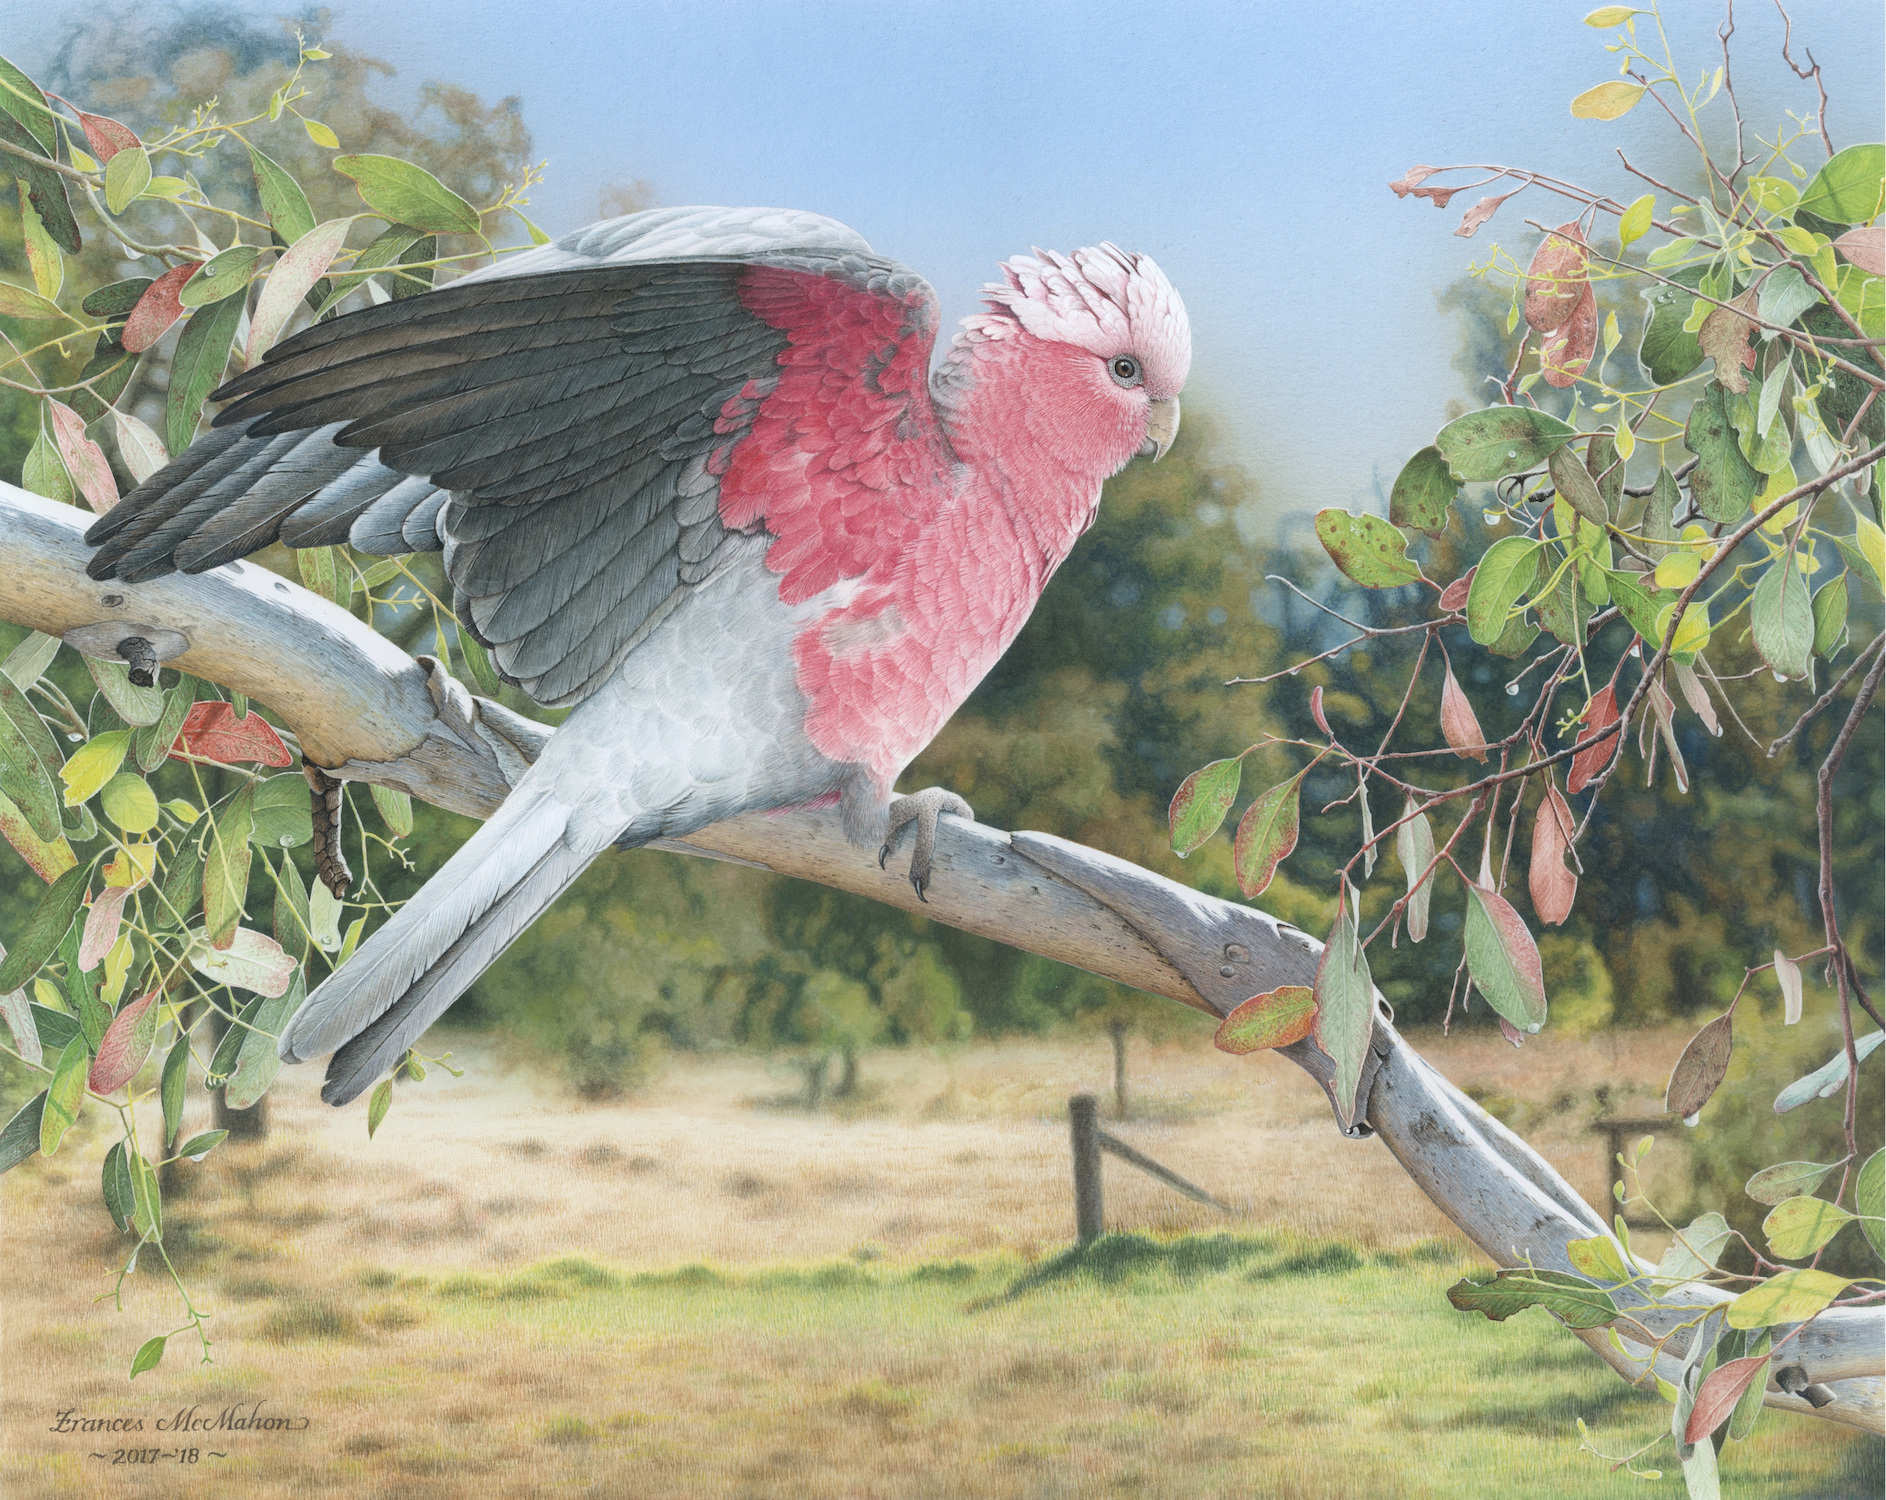 'My Country (Galah)', Frances McMahon, Watercolour and airbrush on 2000gsm rising museum board, 35 x 43.7 cm